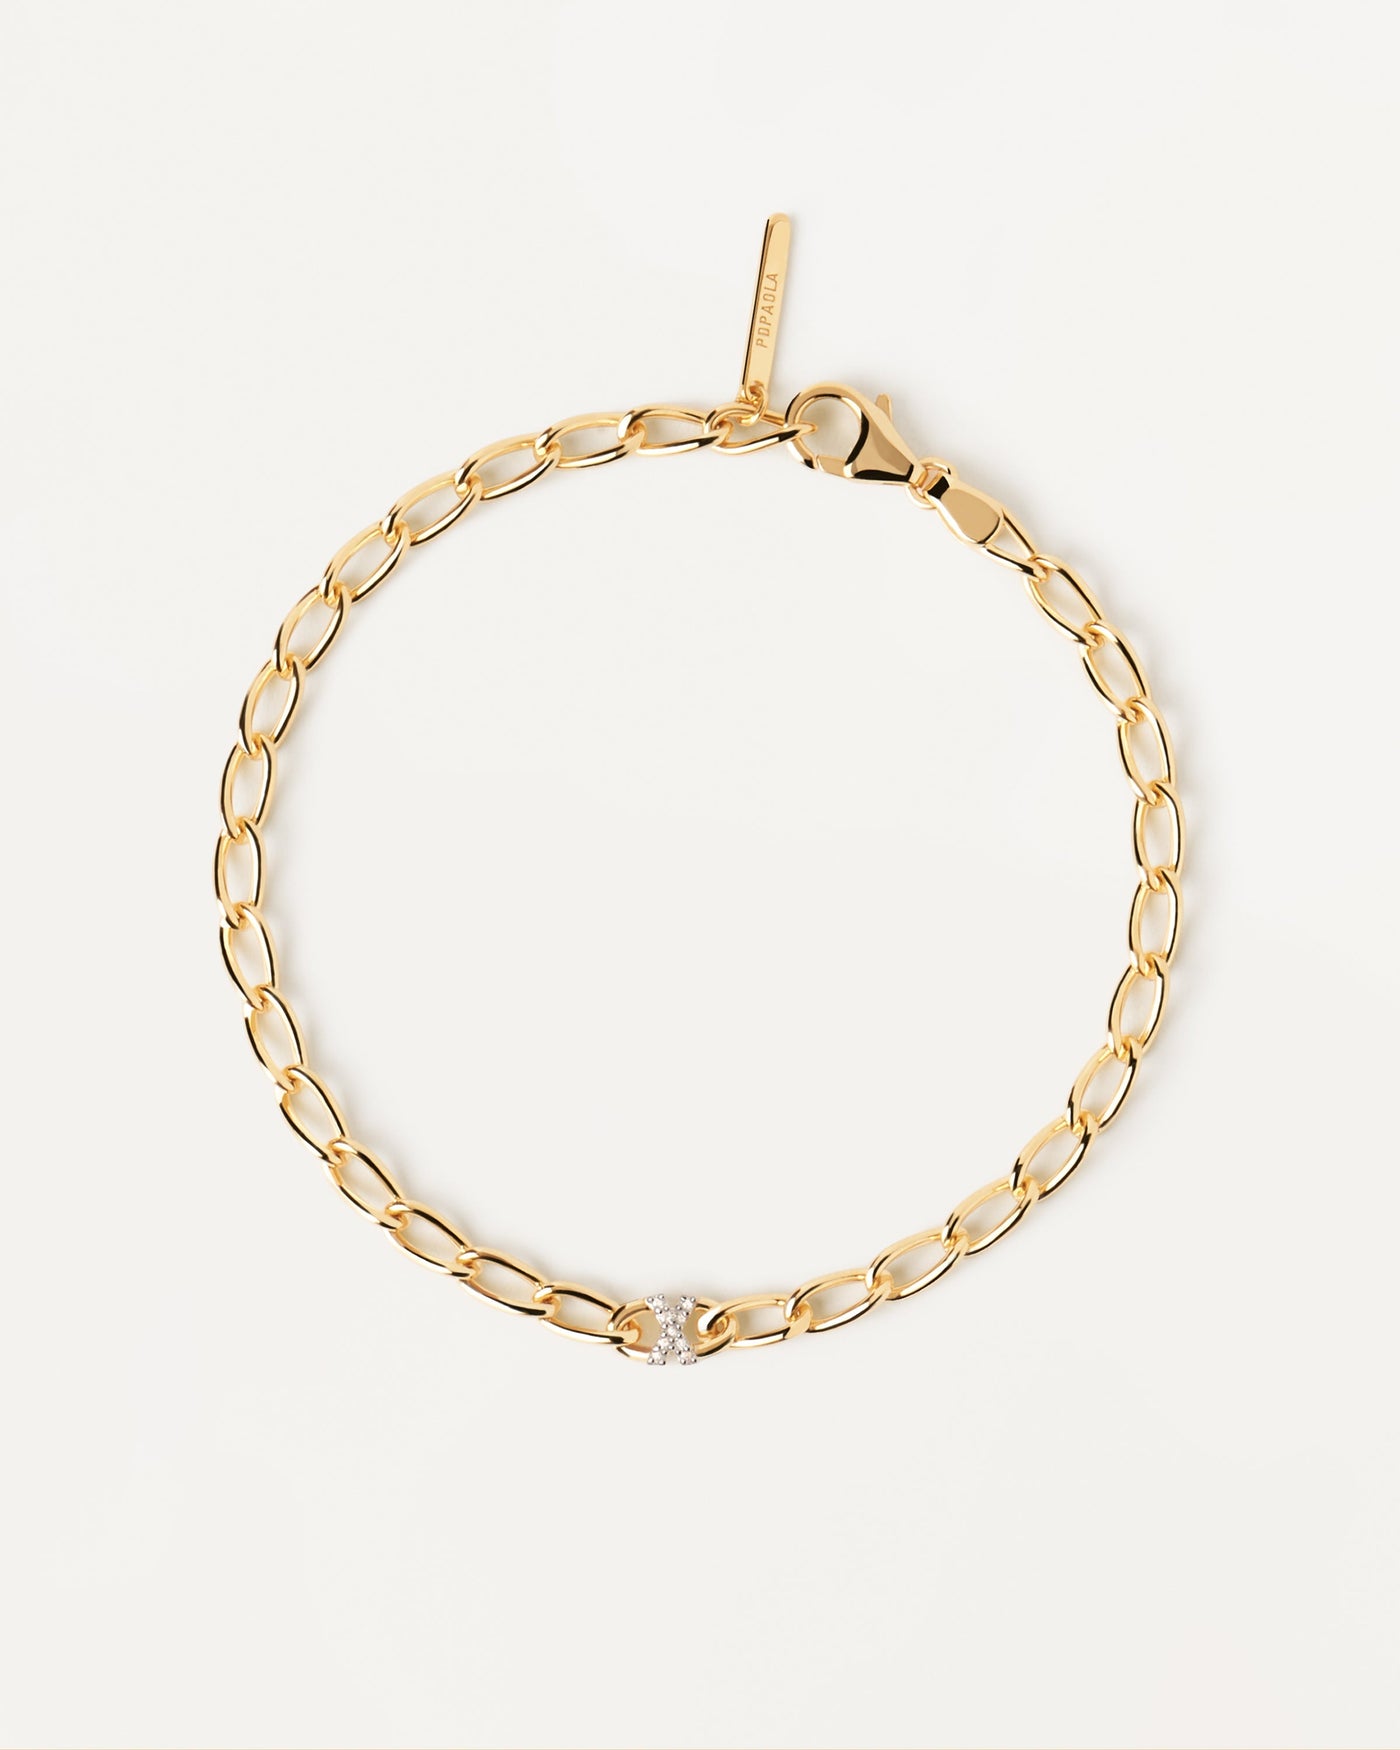 2023 Selection | Letter X Chain Bracelet. cable chain bracelet in gold-plated silver with initial X in zirconia. Get the latest arrival from PDPAOLA. Place your order safely and get this Best Seller. Free Shipping.